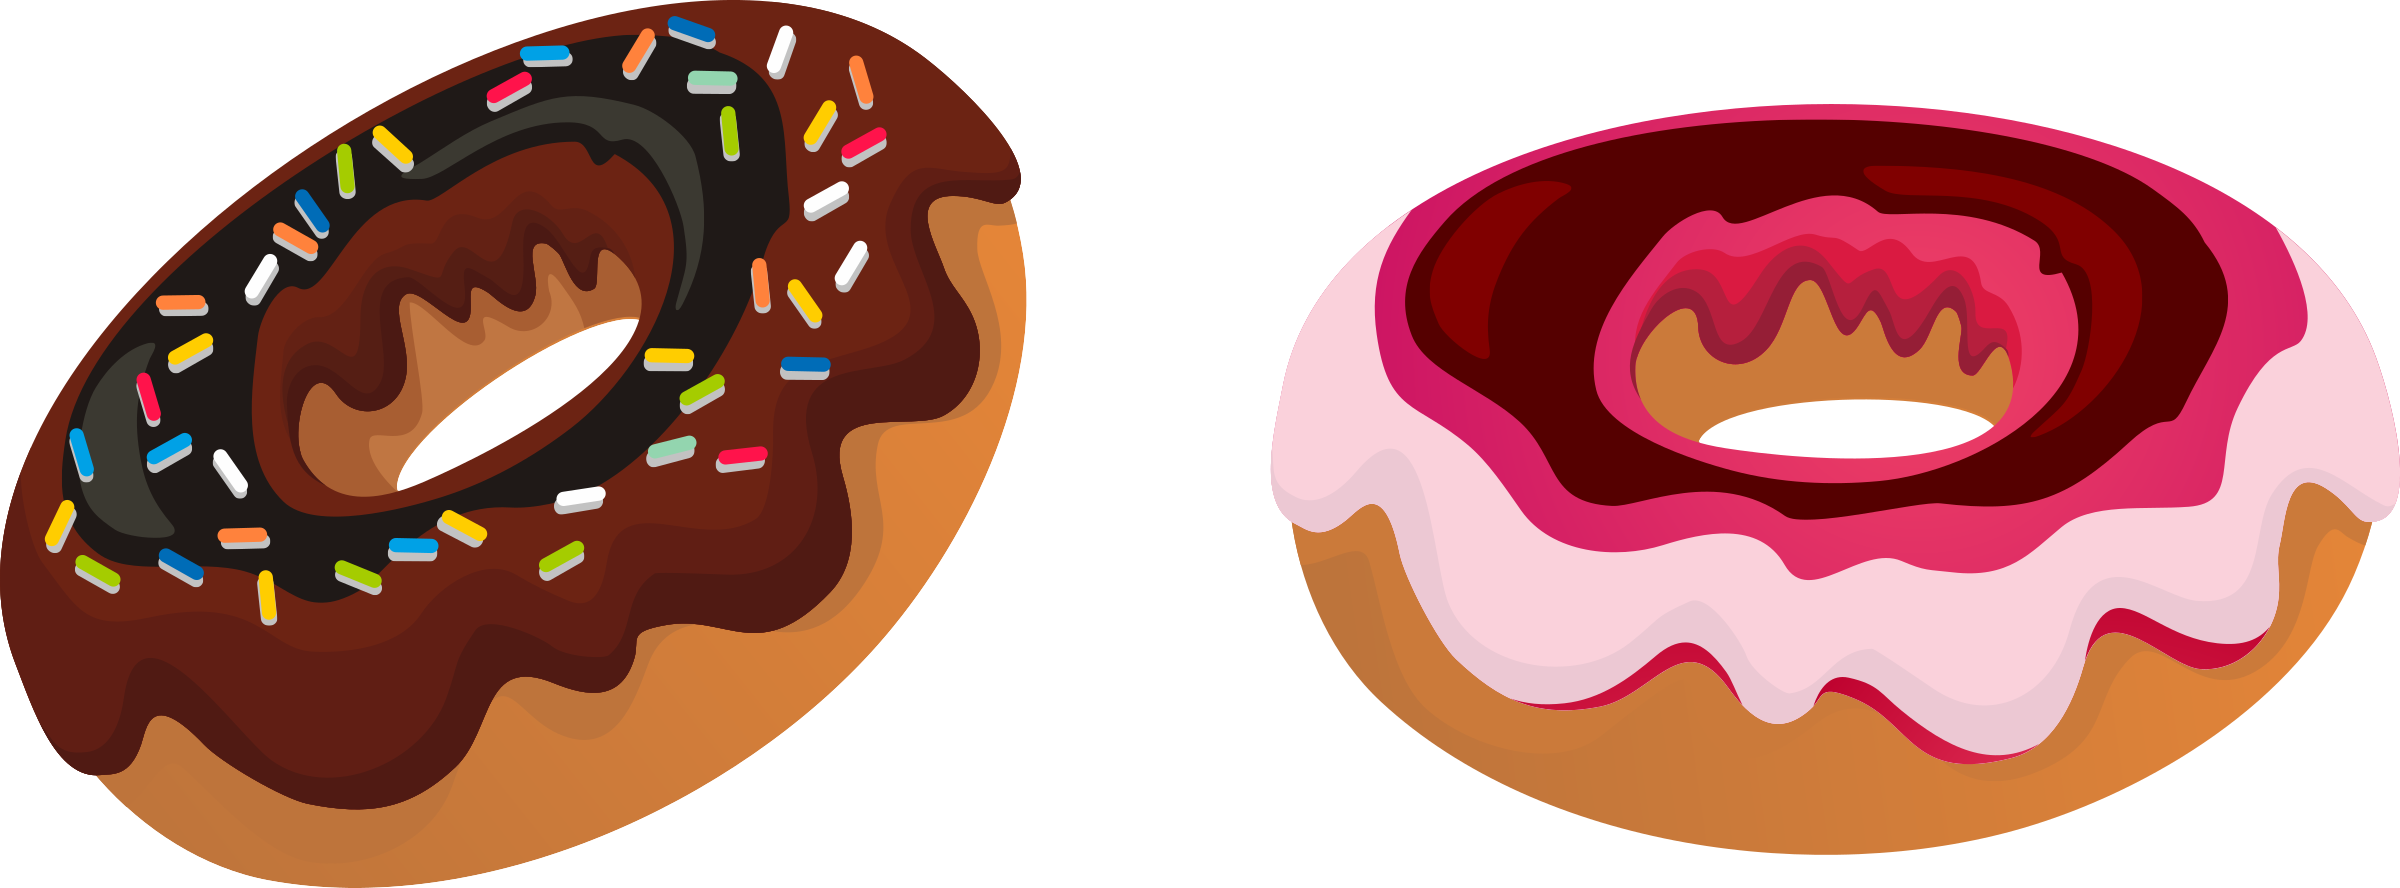 Donnuts big image png. Donuts clipart small